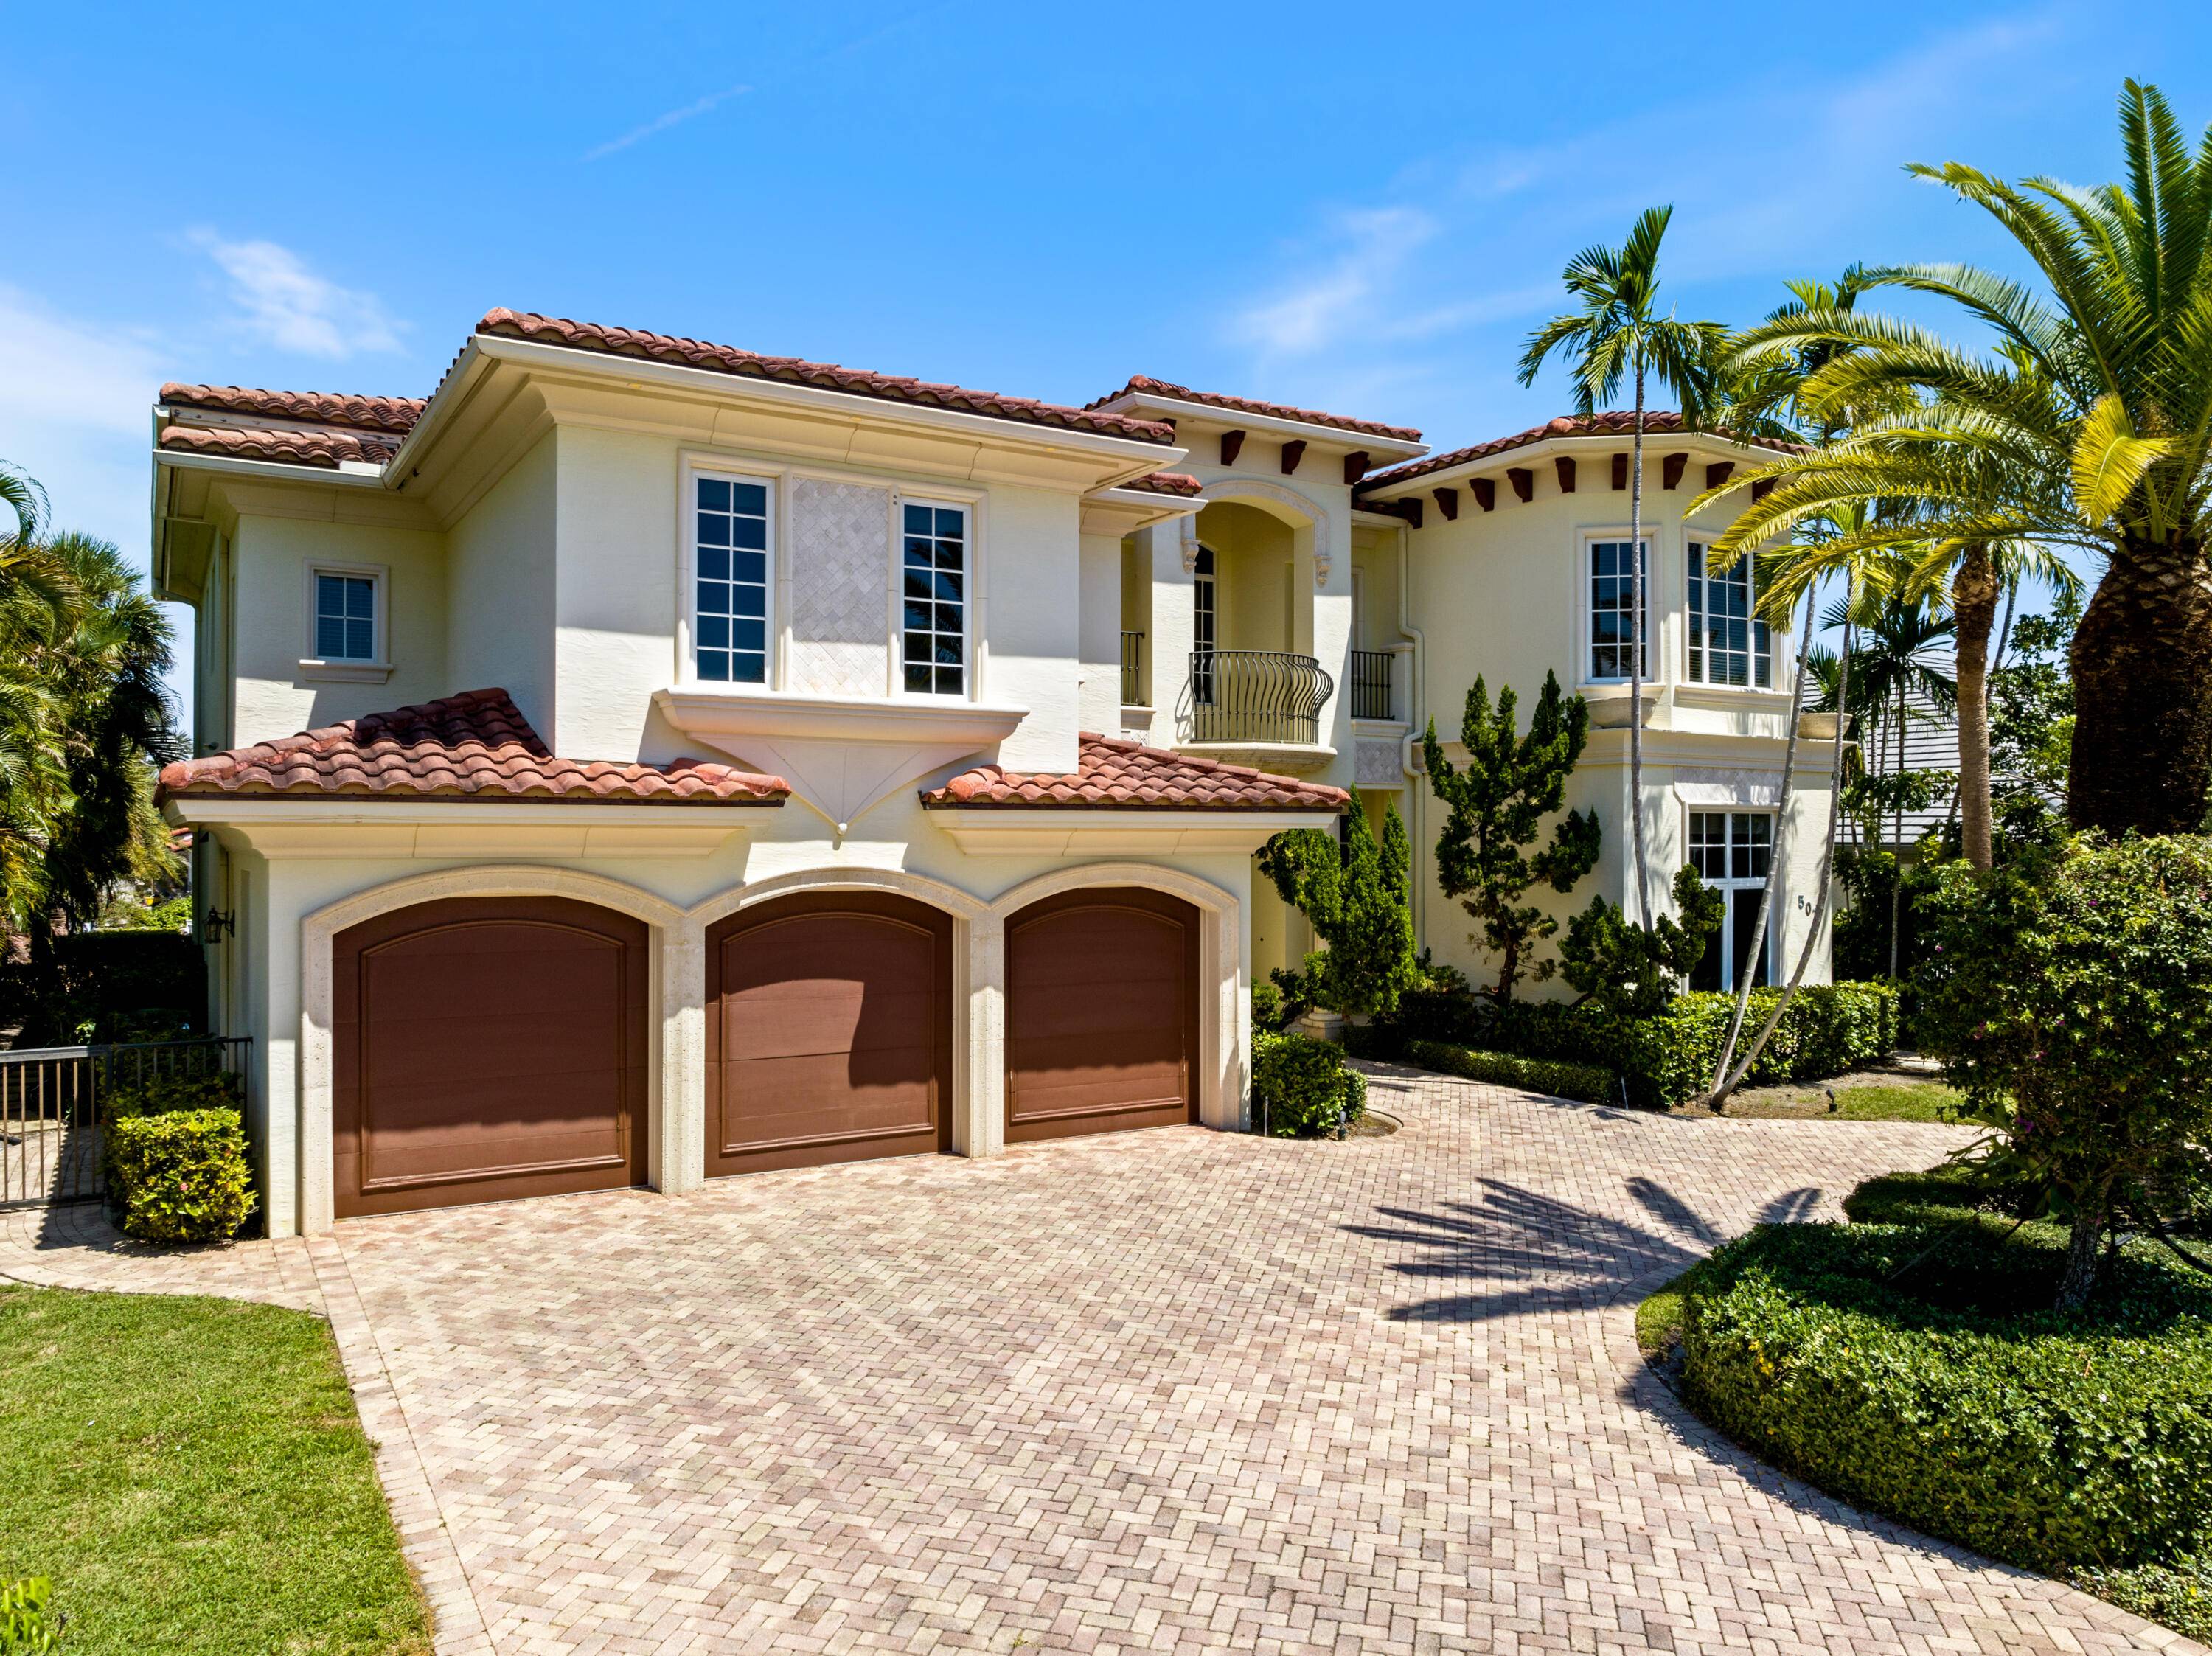 Welcome to Paradise ! Golden Harbour is one of the most prestigious neighborhoods in East Boca Raton.